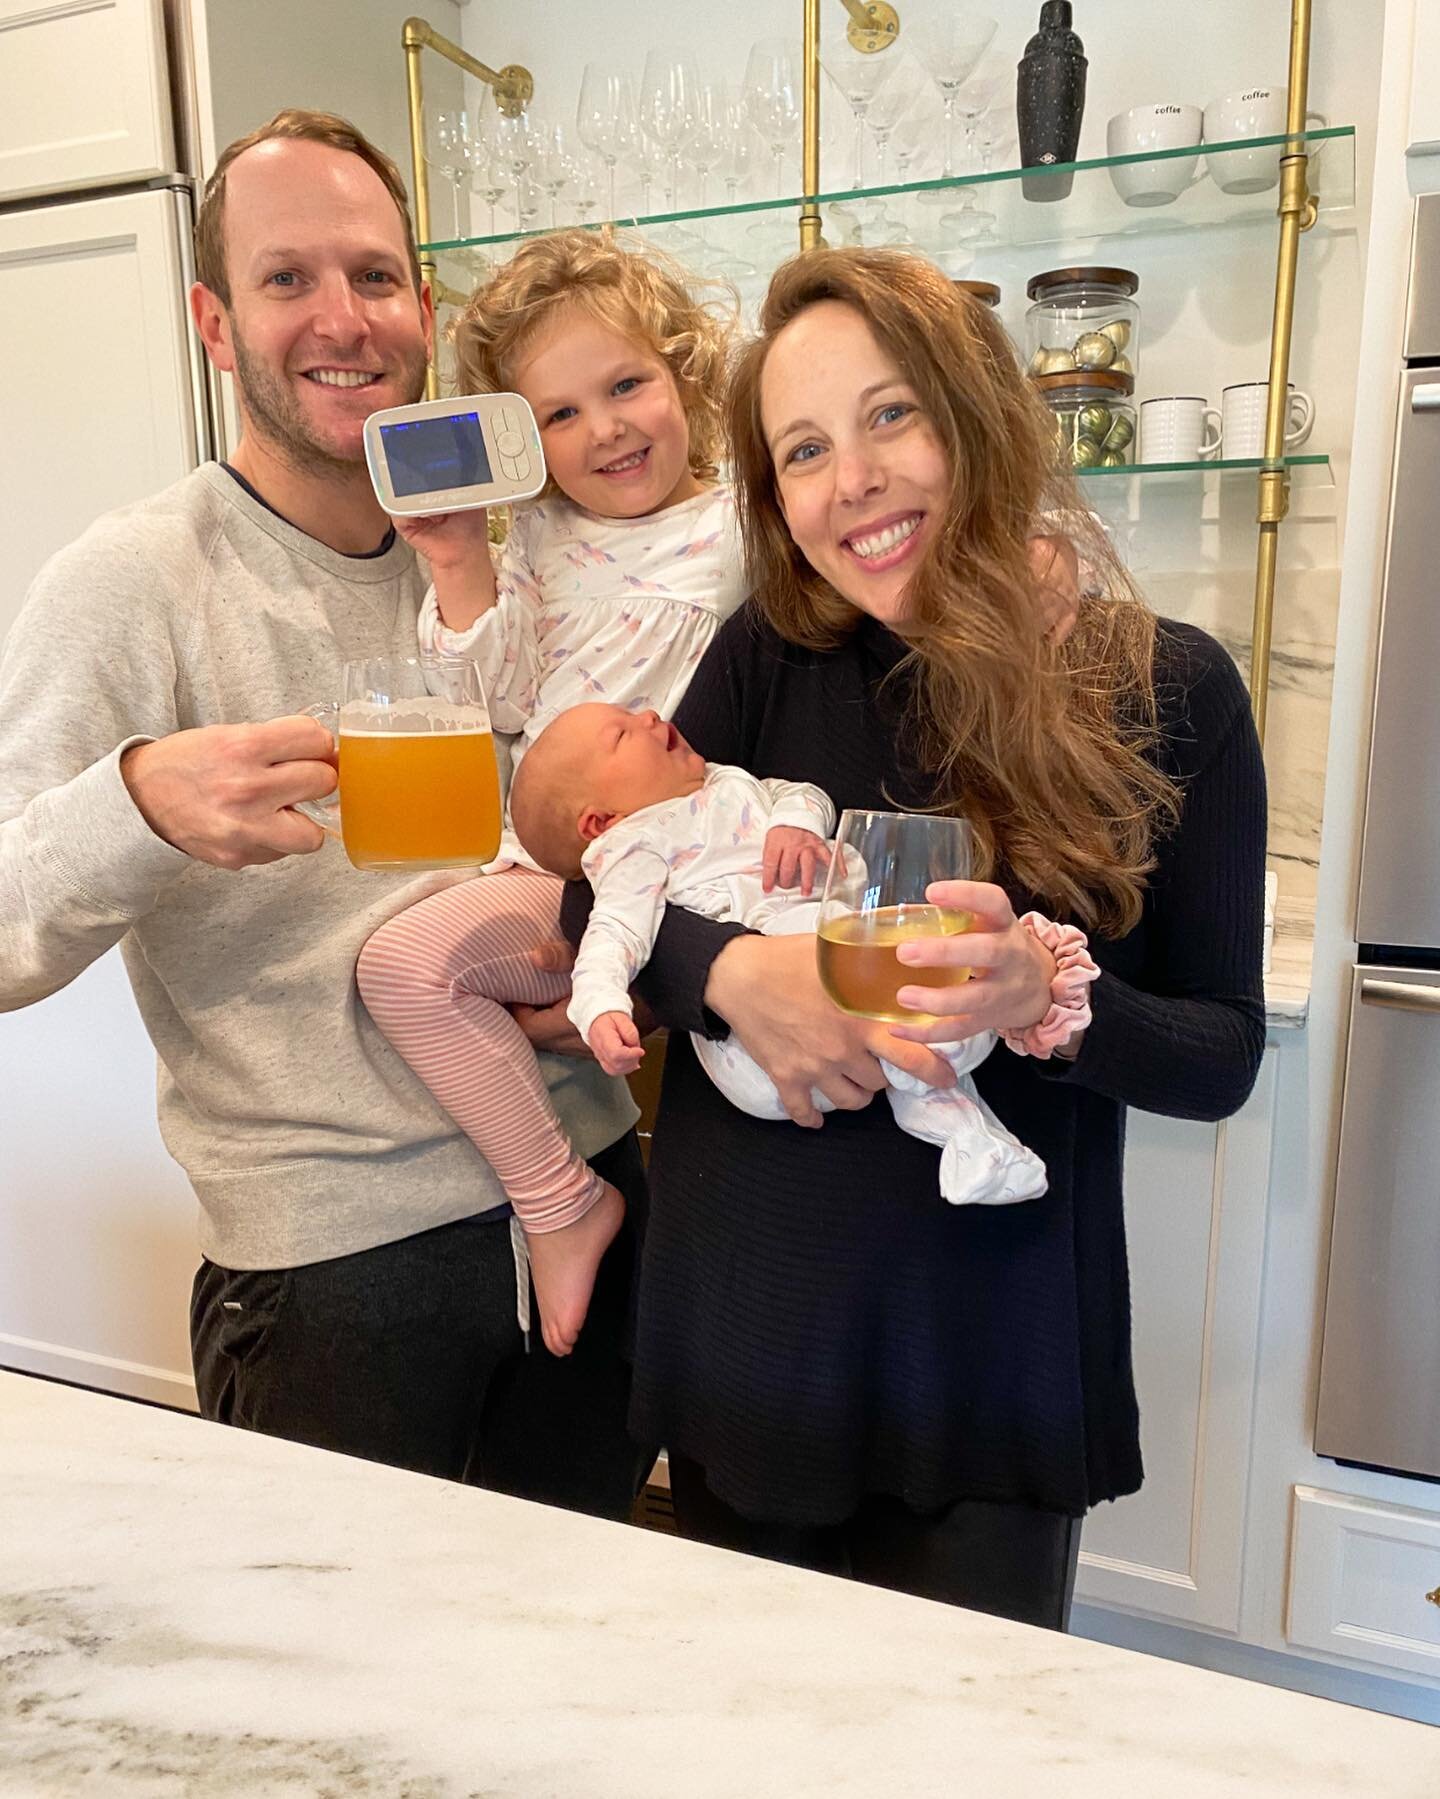 Throwing it back to the day we brought Goldie home 💗. The girls had the sweeeetest intro, then we put Kenzie down for a nap (hence the monitor) &amp; Matty promptly poured us some cocktails to celebrate. We took a breath annnnndddd it&rsquo;s been t